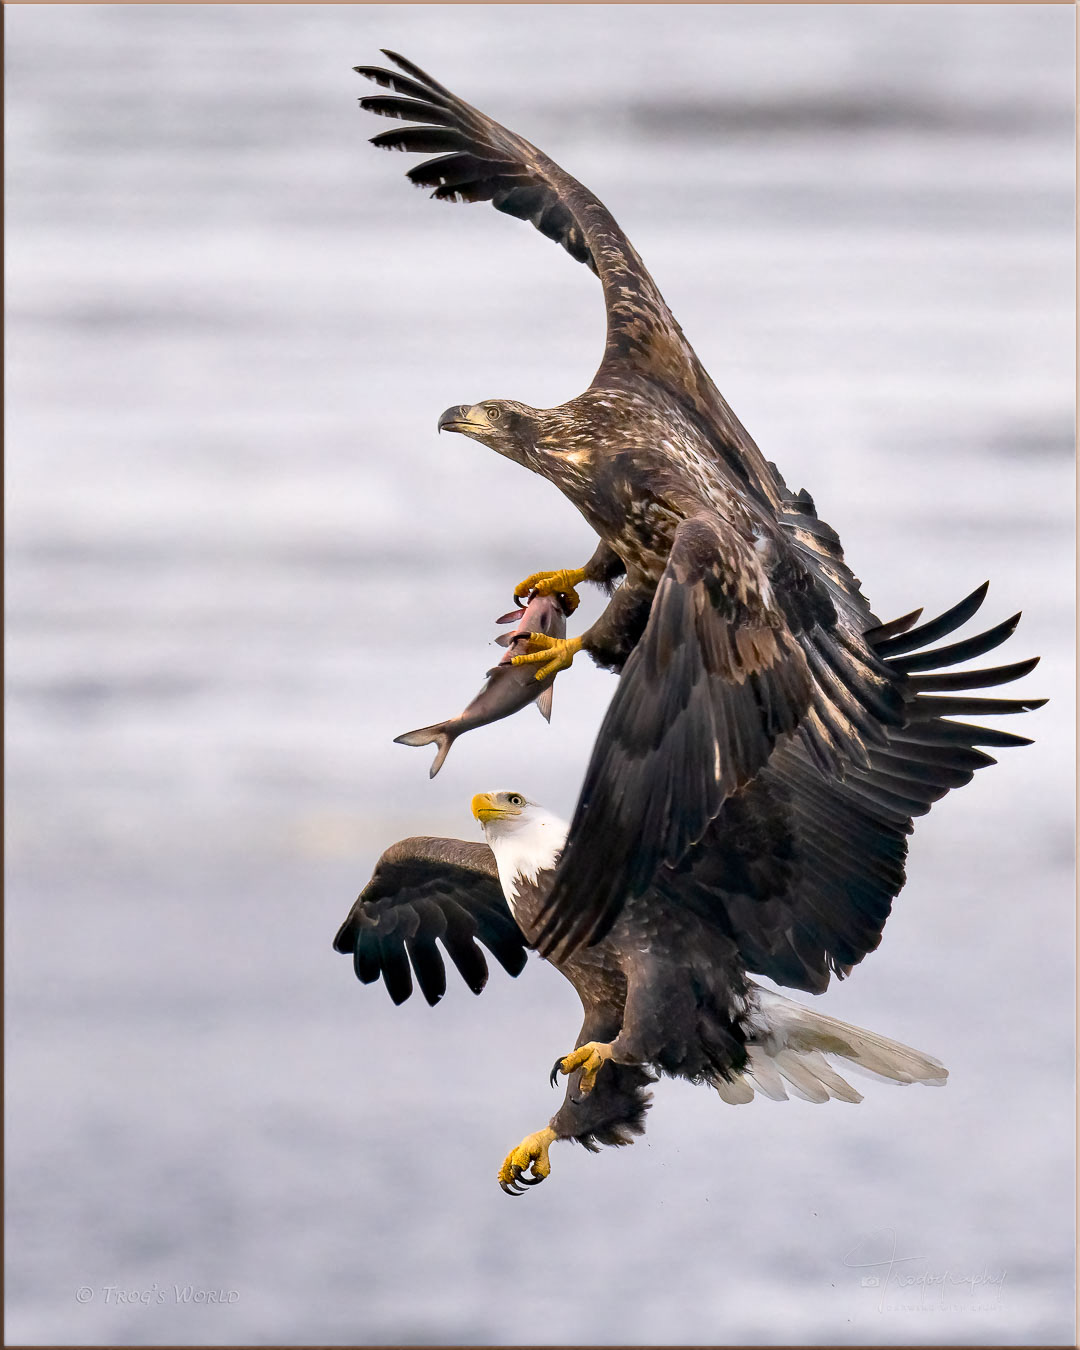 American Bald Eagle with a fish